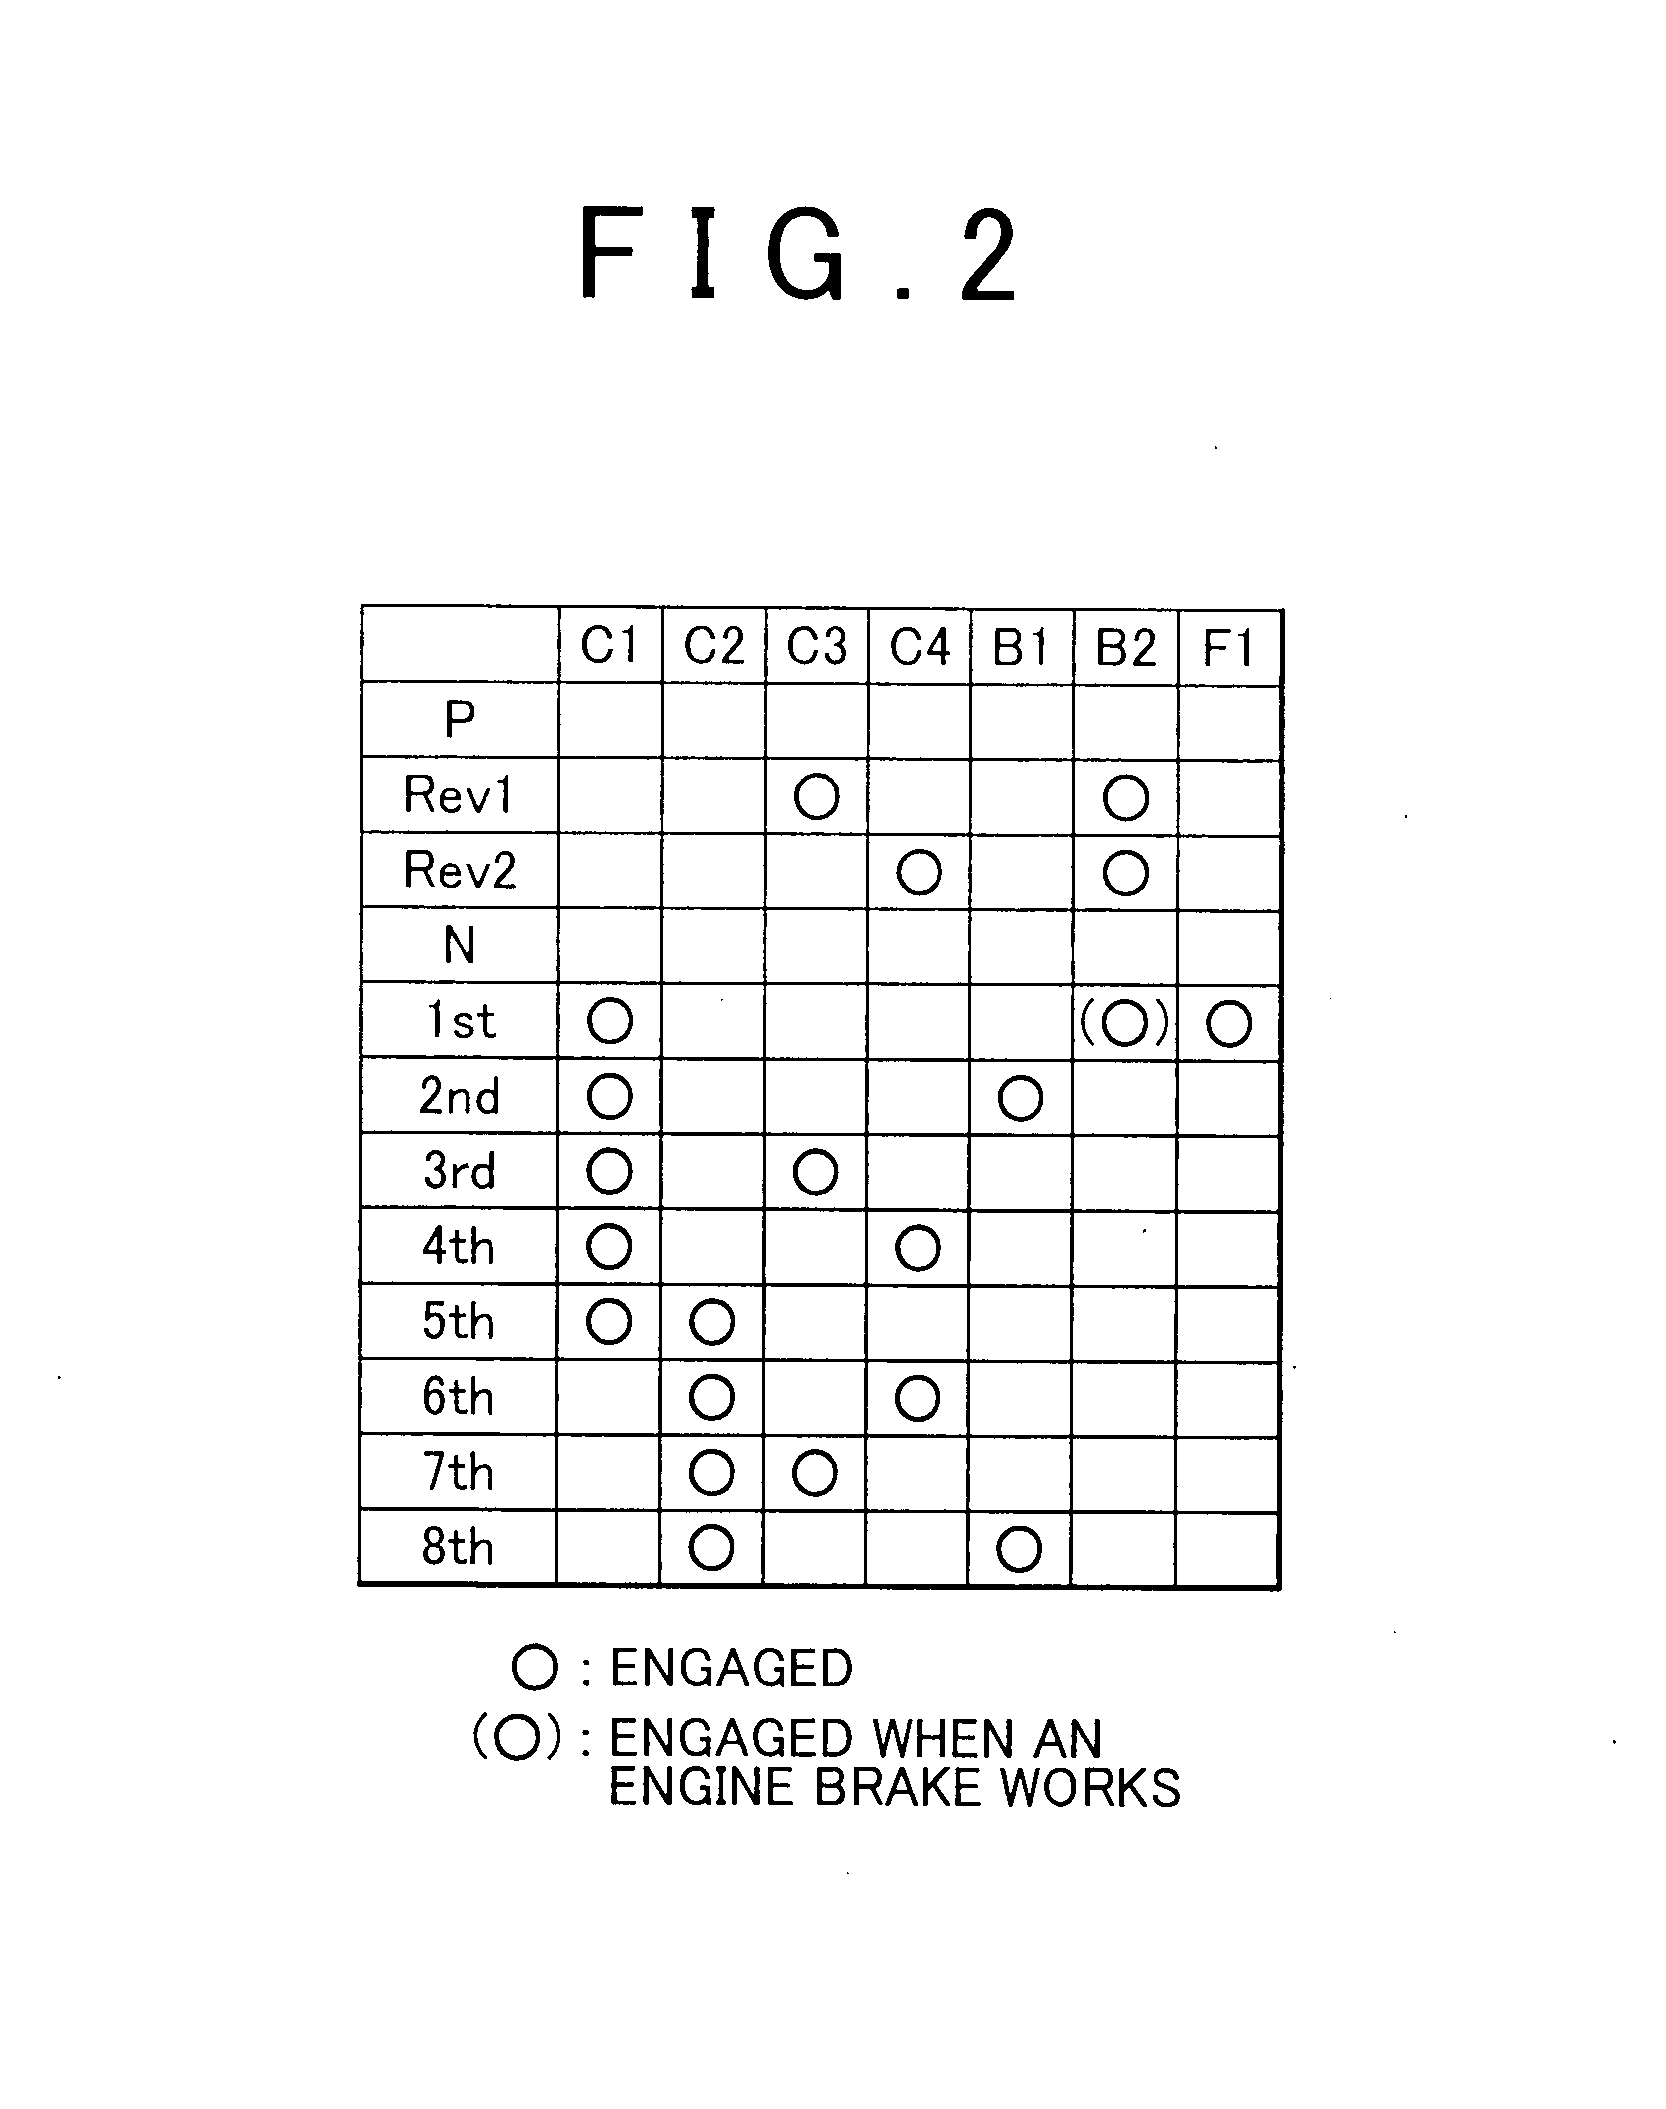 Hydraulic control system for use in a motor vehicle and method for controlling the hydraulic control system